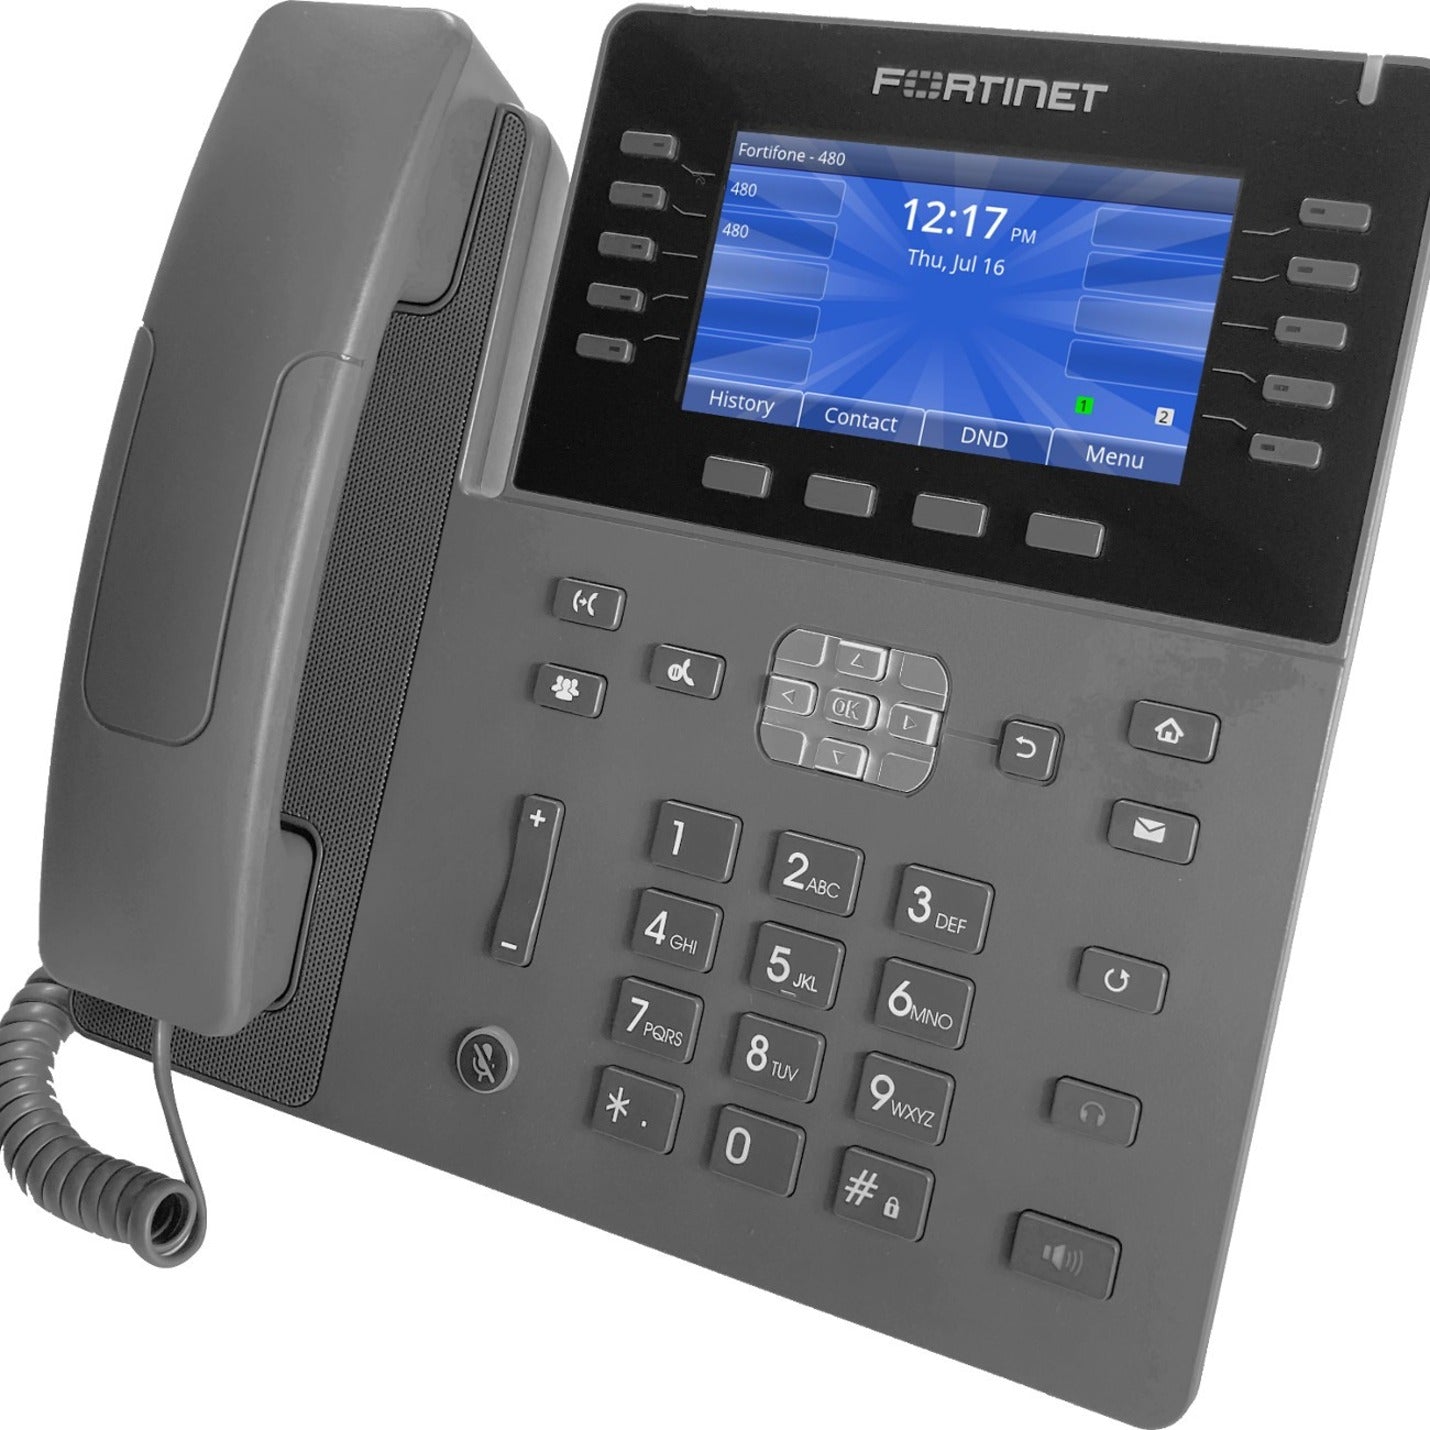 Fortinet FortiFone FON-480 IP Phone - VoIP, Bluetooth, Color Display [Discontinued]